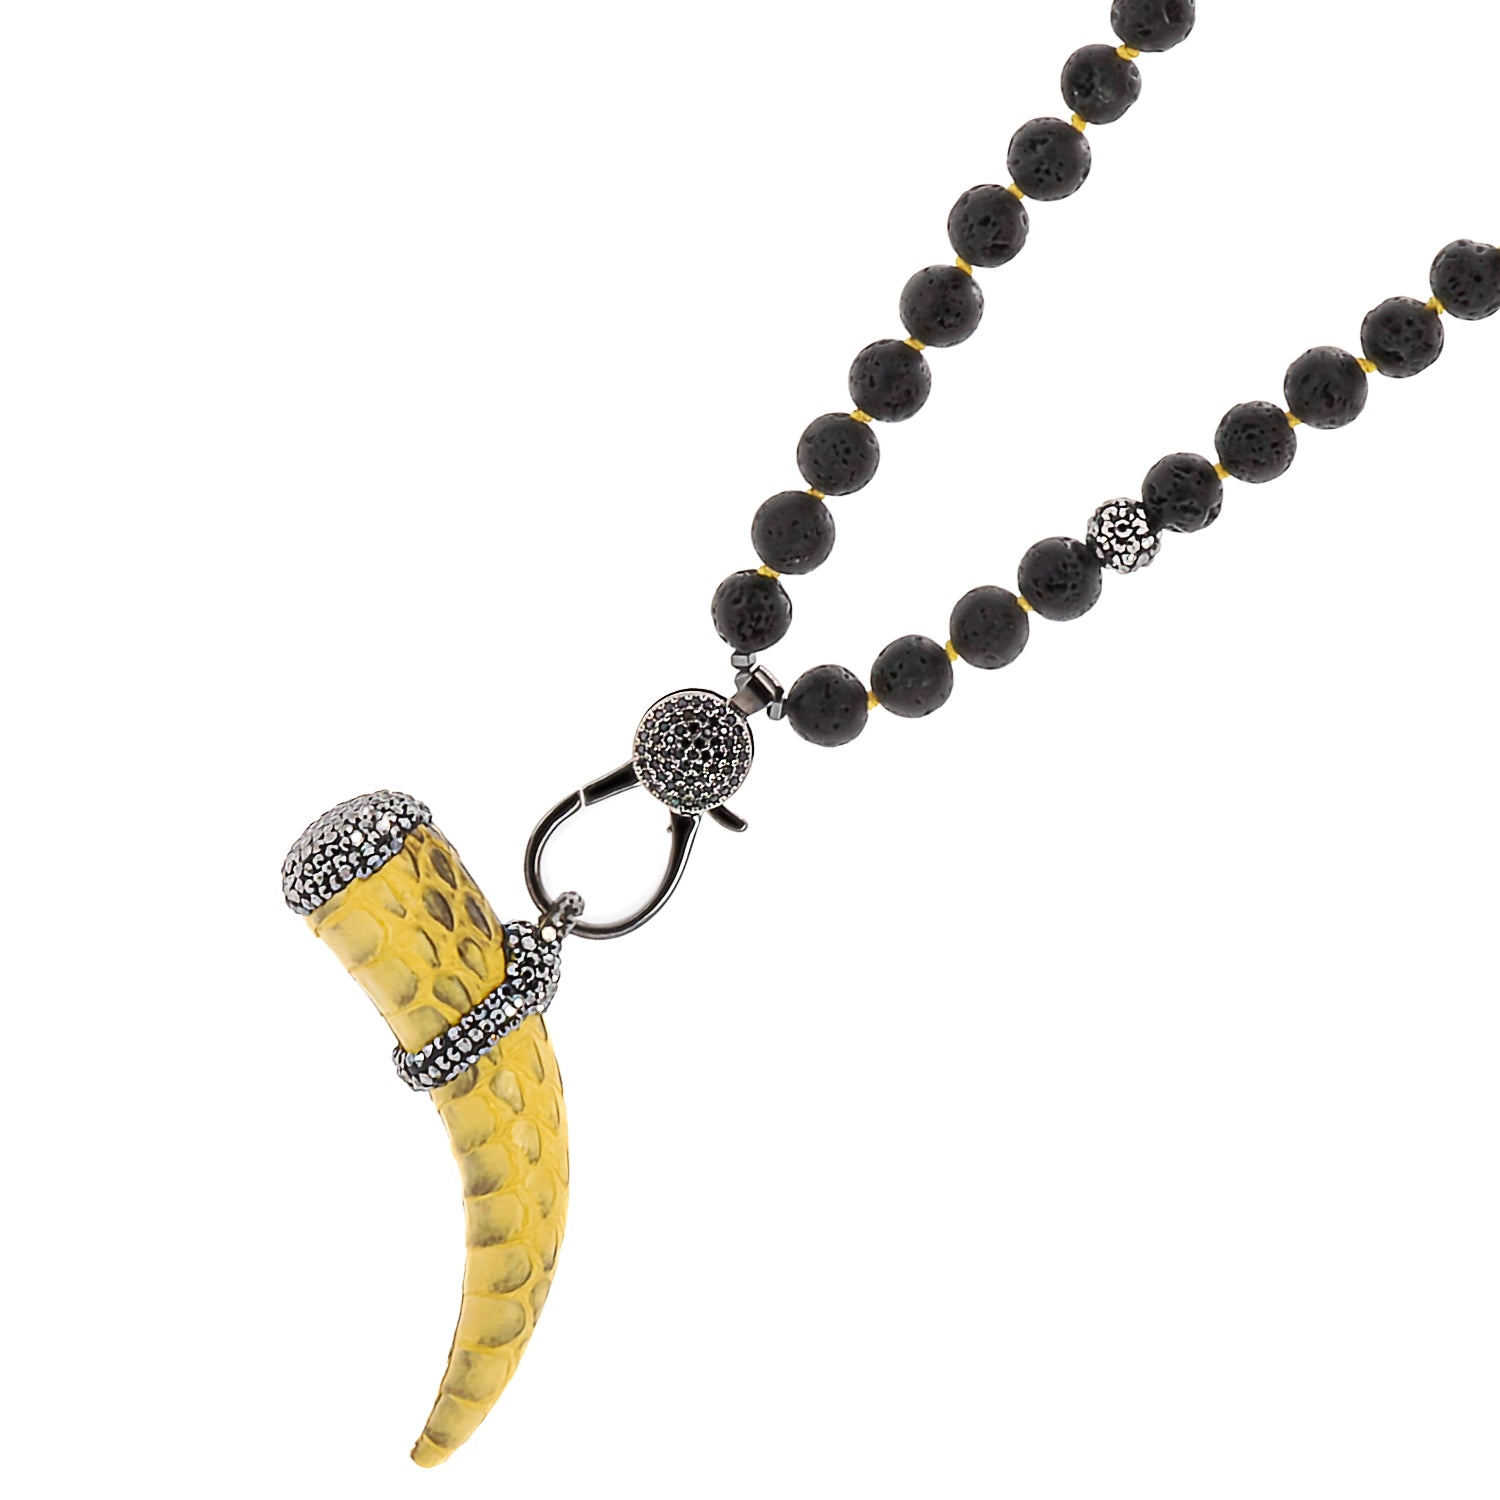 Detail shot of the intricate Cornicello pendant, crafted with attention to detail and symbolic significance.